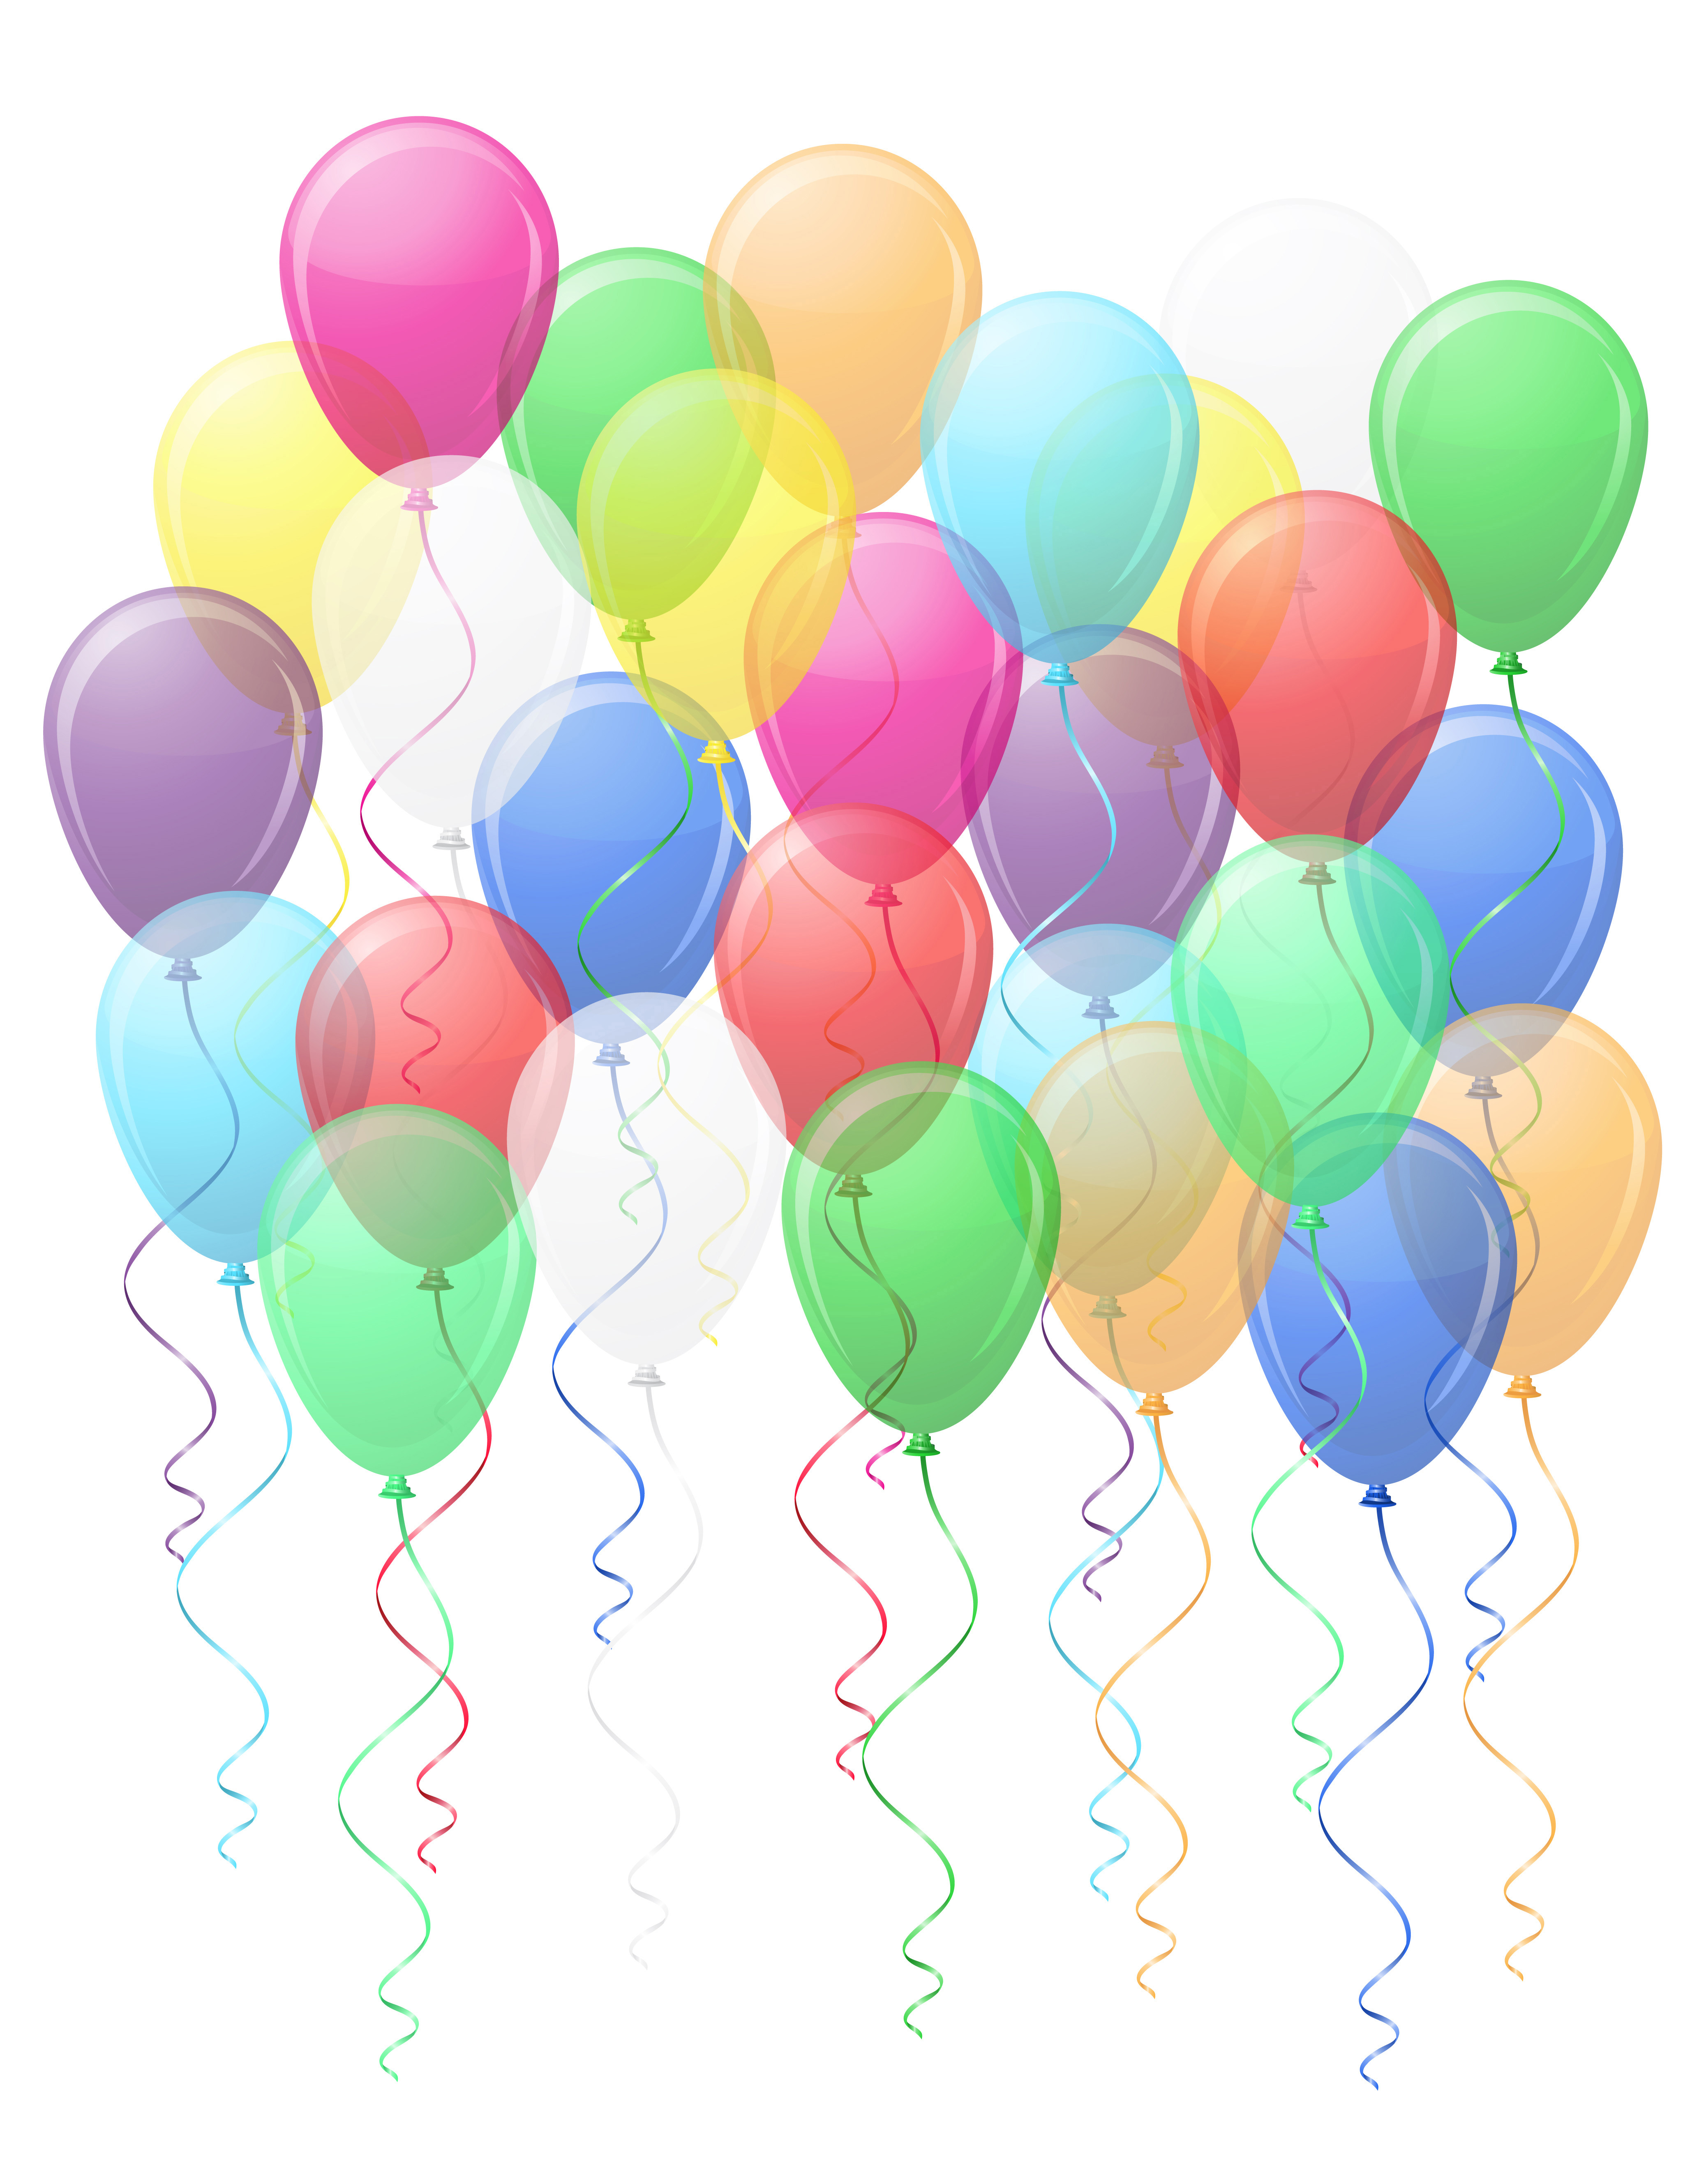 colored transparent balloons vector illustration EPS10 489409 Download Free Vectors Clipart